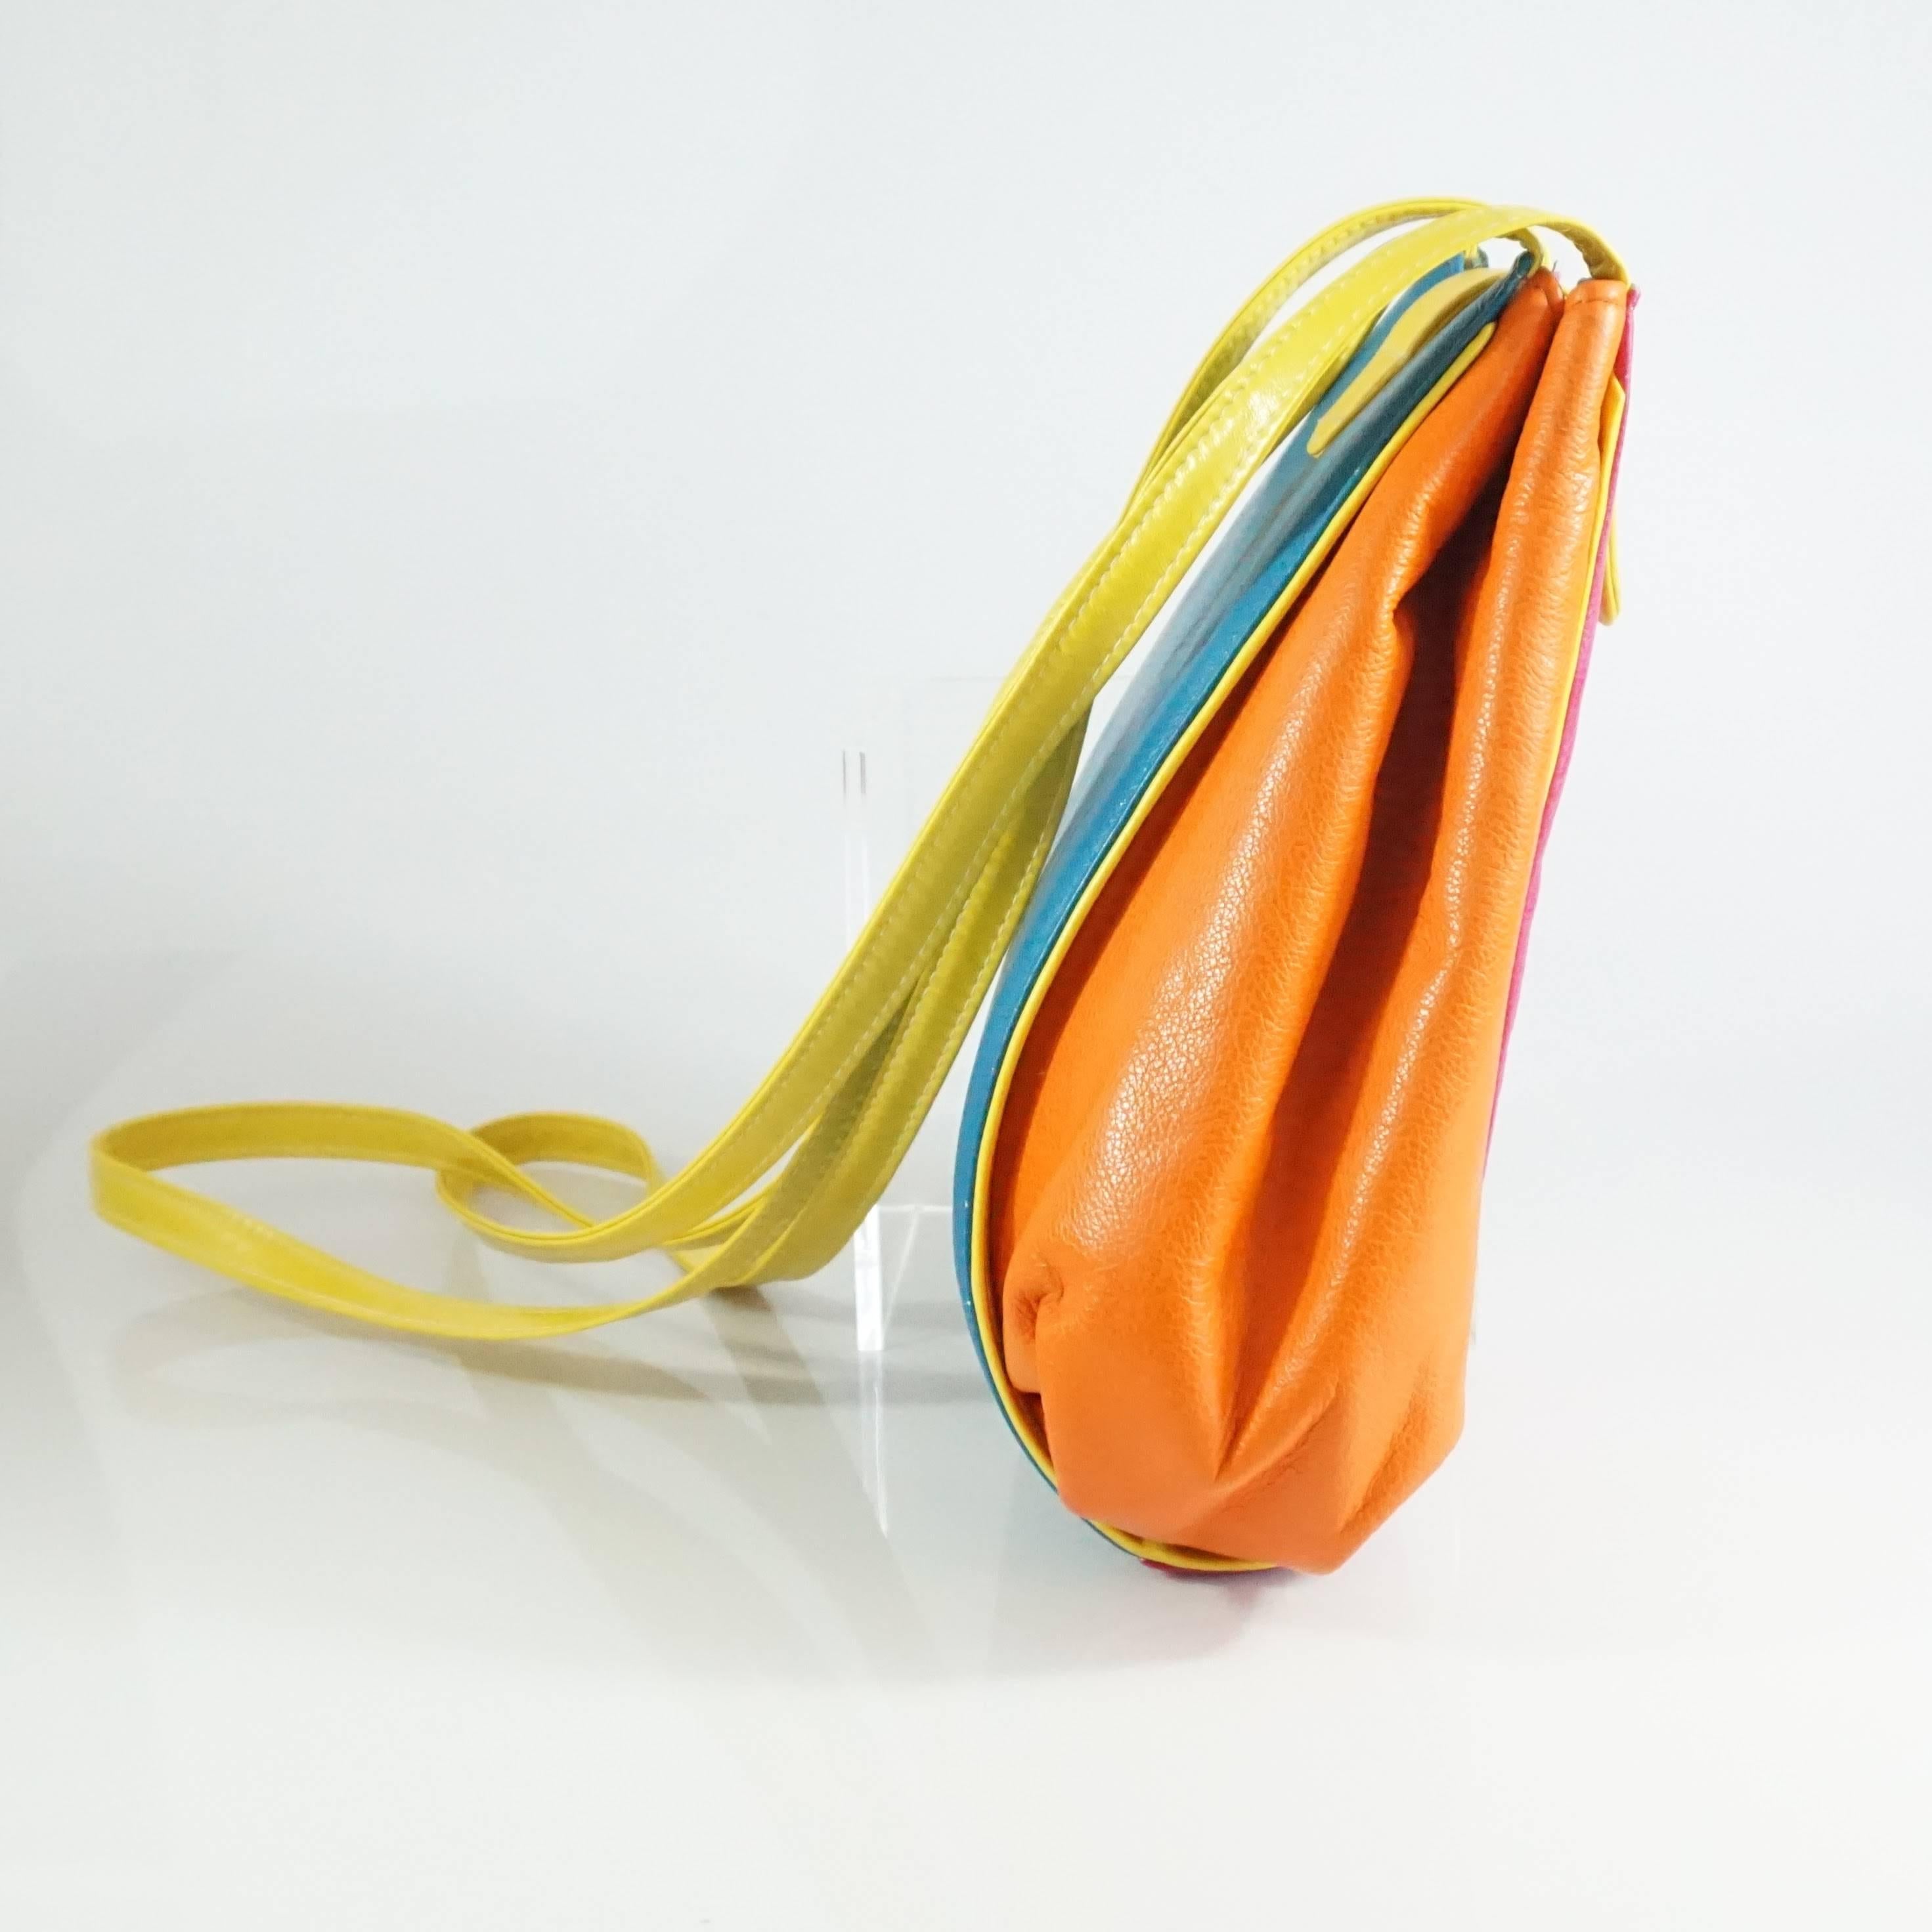 This vintage cross body bag is the perfect pop of color. It is made of leather and features a snap closure, an accordion style opening, white leather lining, and one small zipper compartment. The bag has yellow, orange, pink, green, blue, and purple